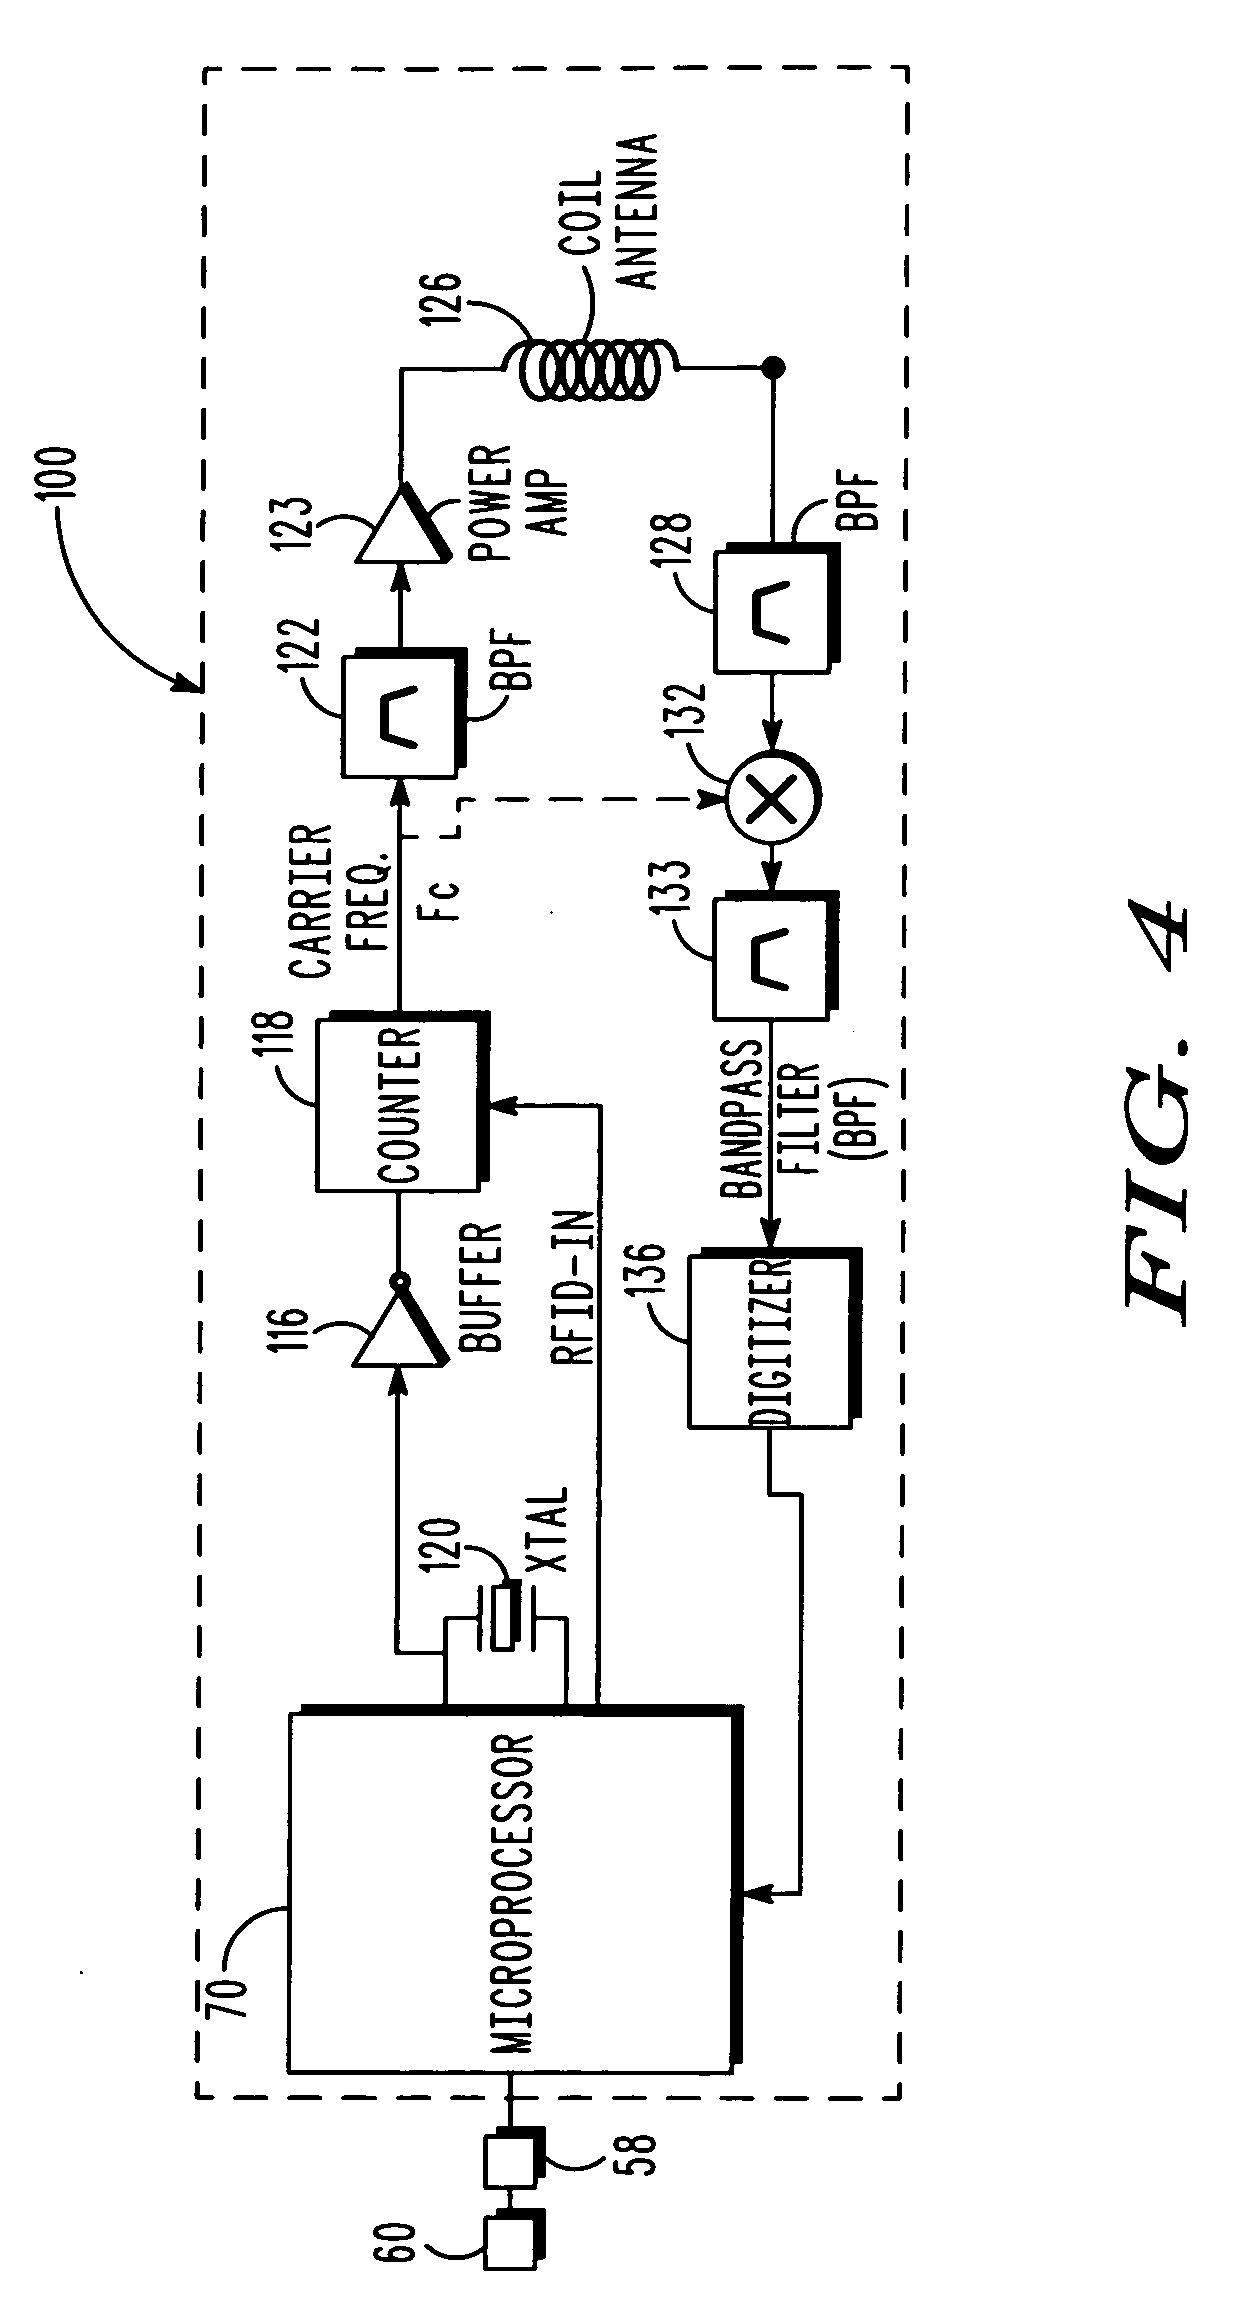 Radio frequency identification reader with variable range